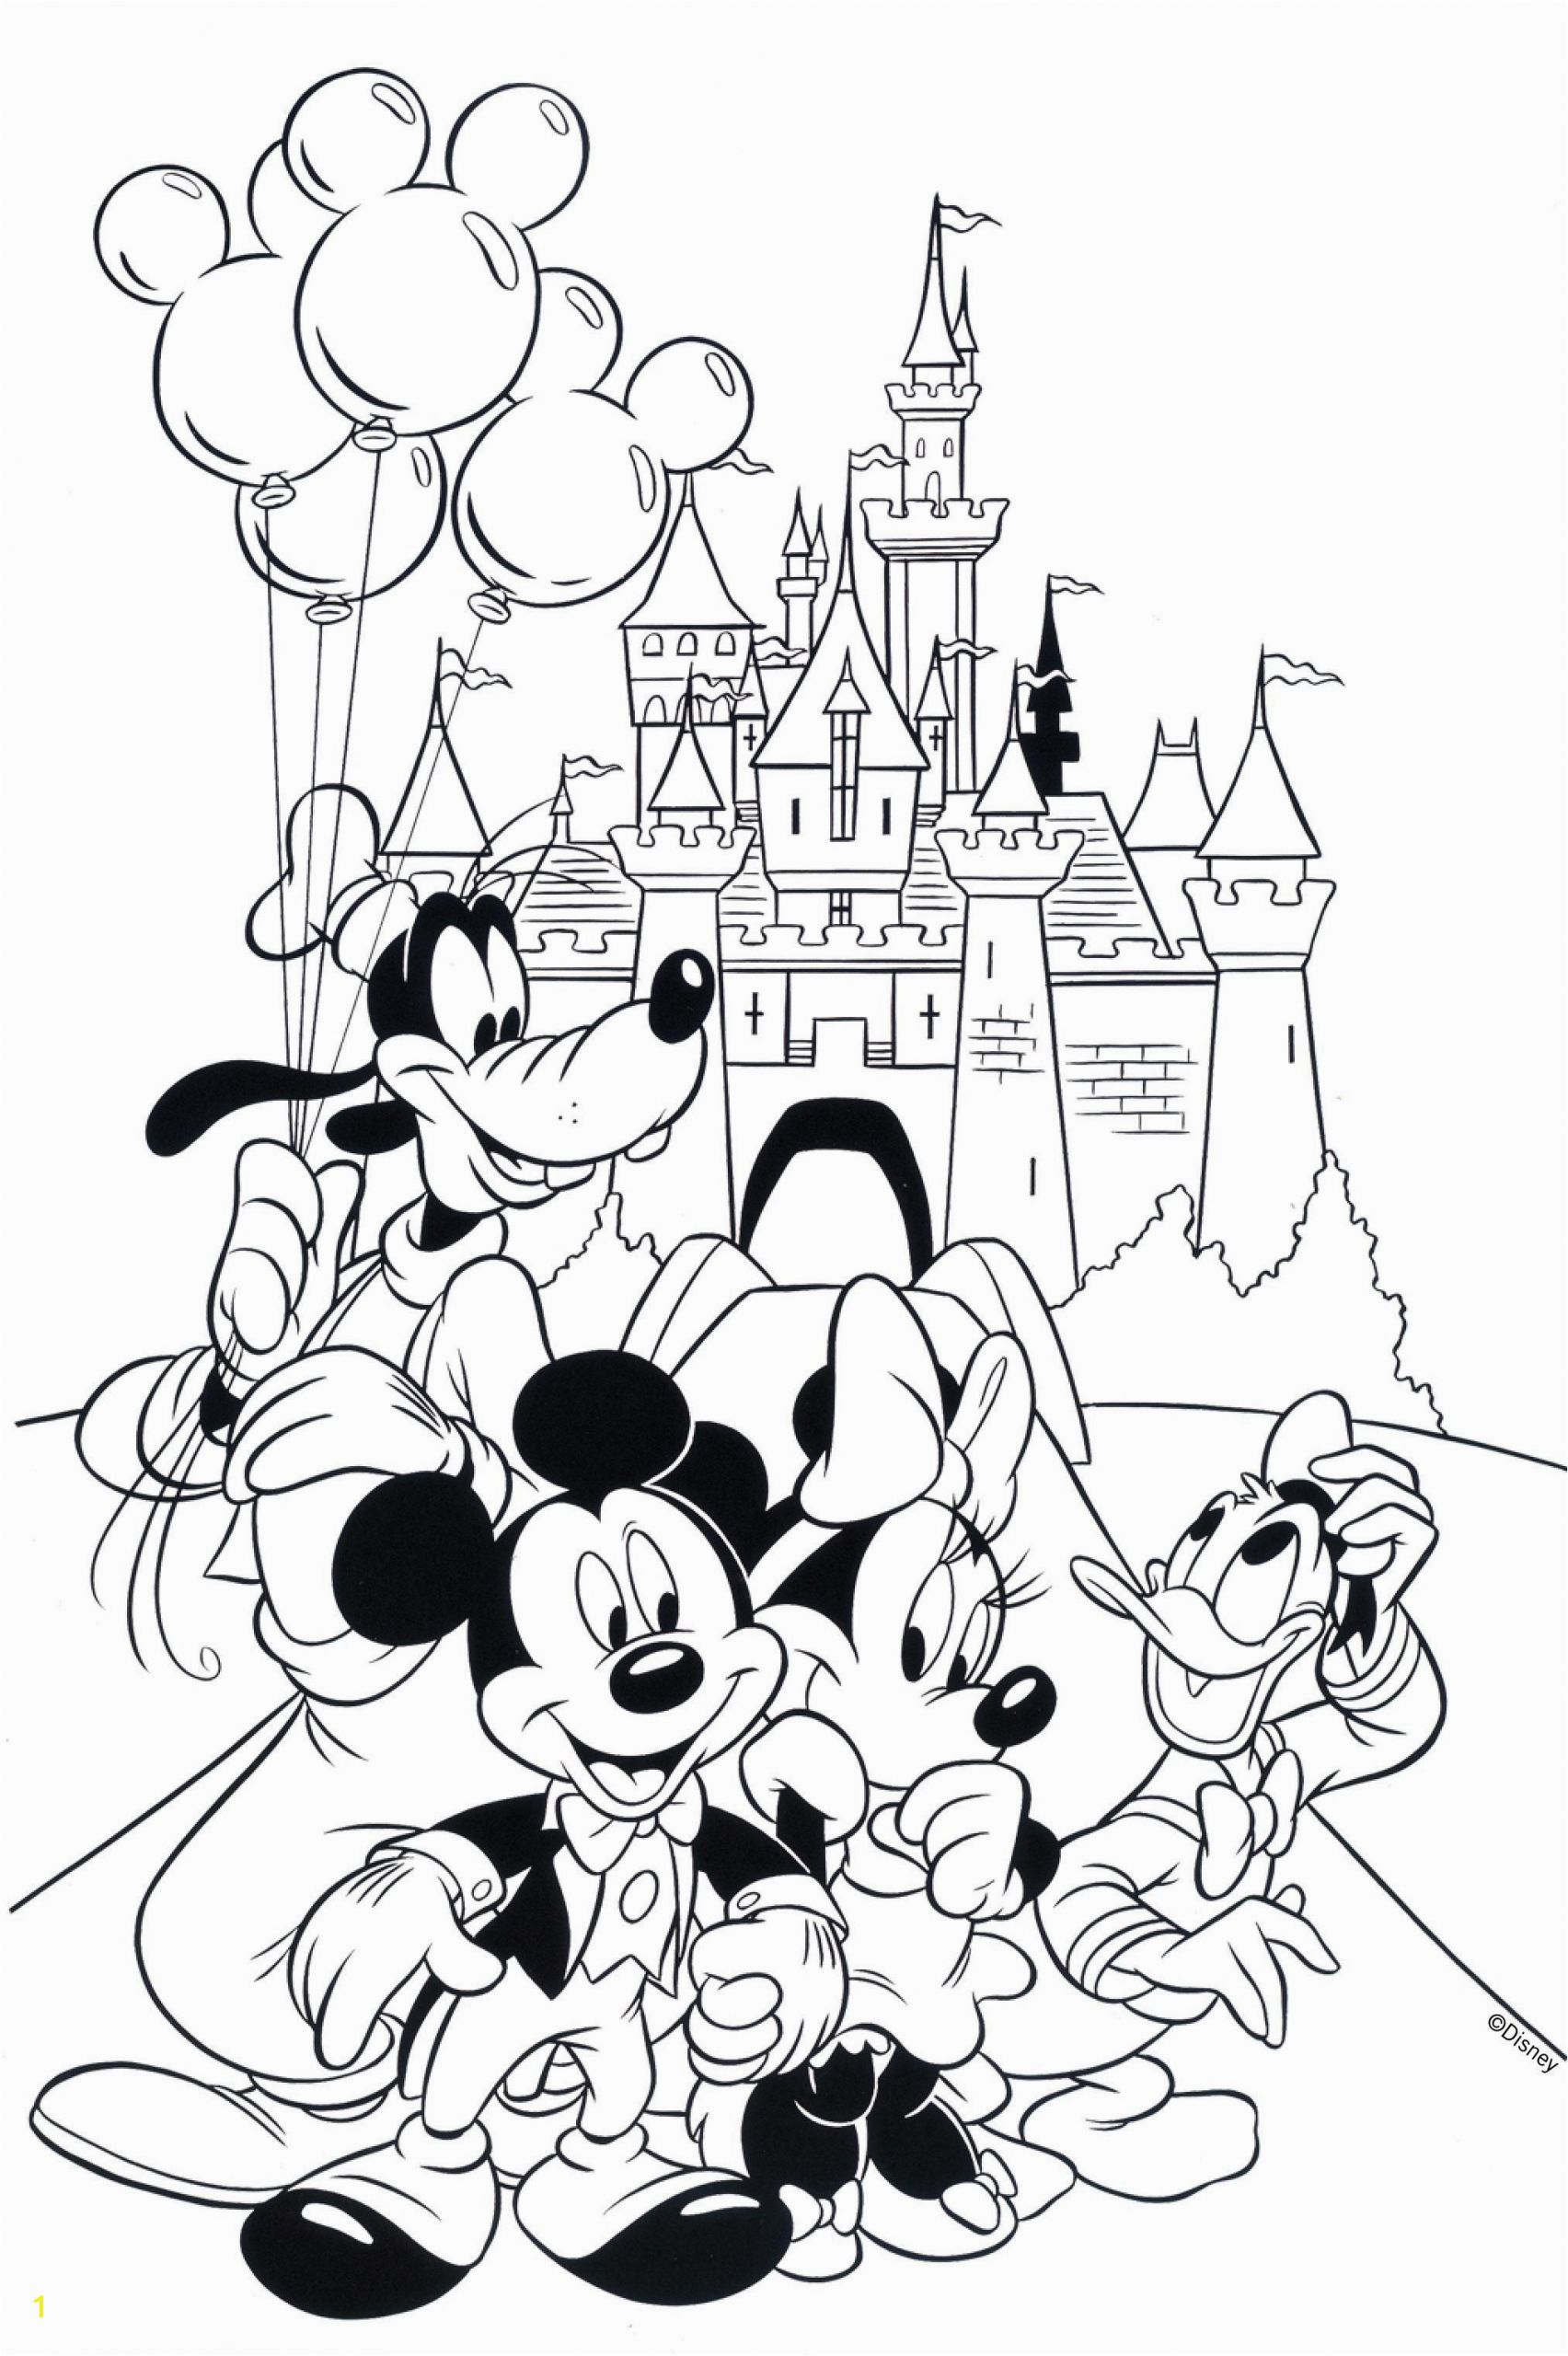 Coloring Pages Disney Mickey Mouse Free Children S Colouring In Ð² 2020 Ð³ Ñ